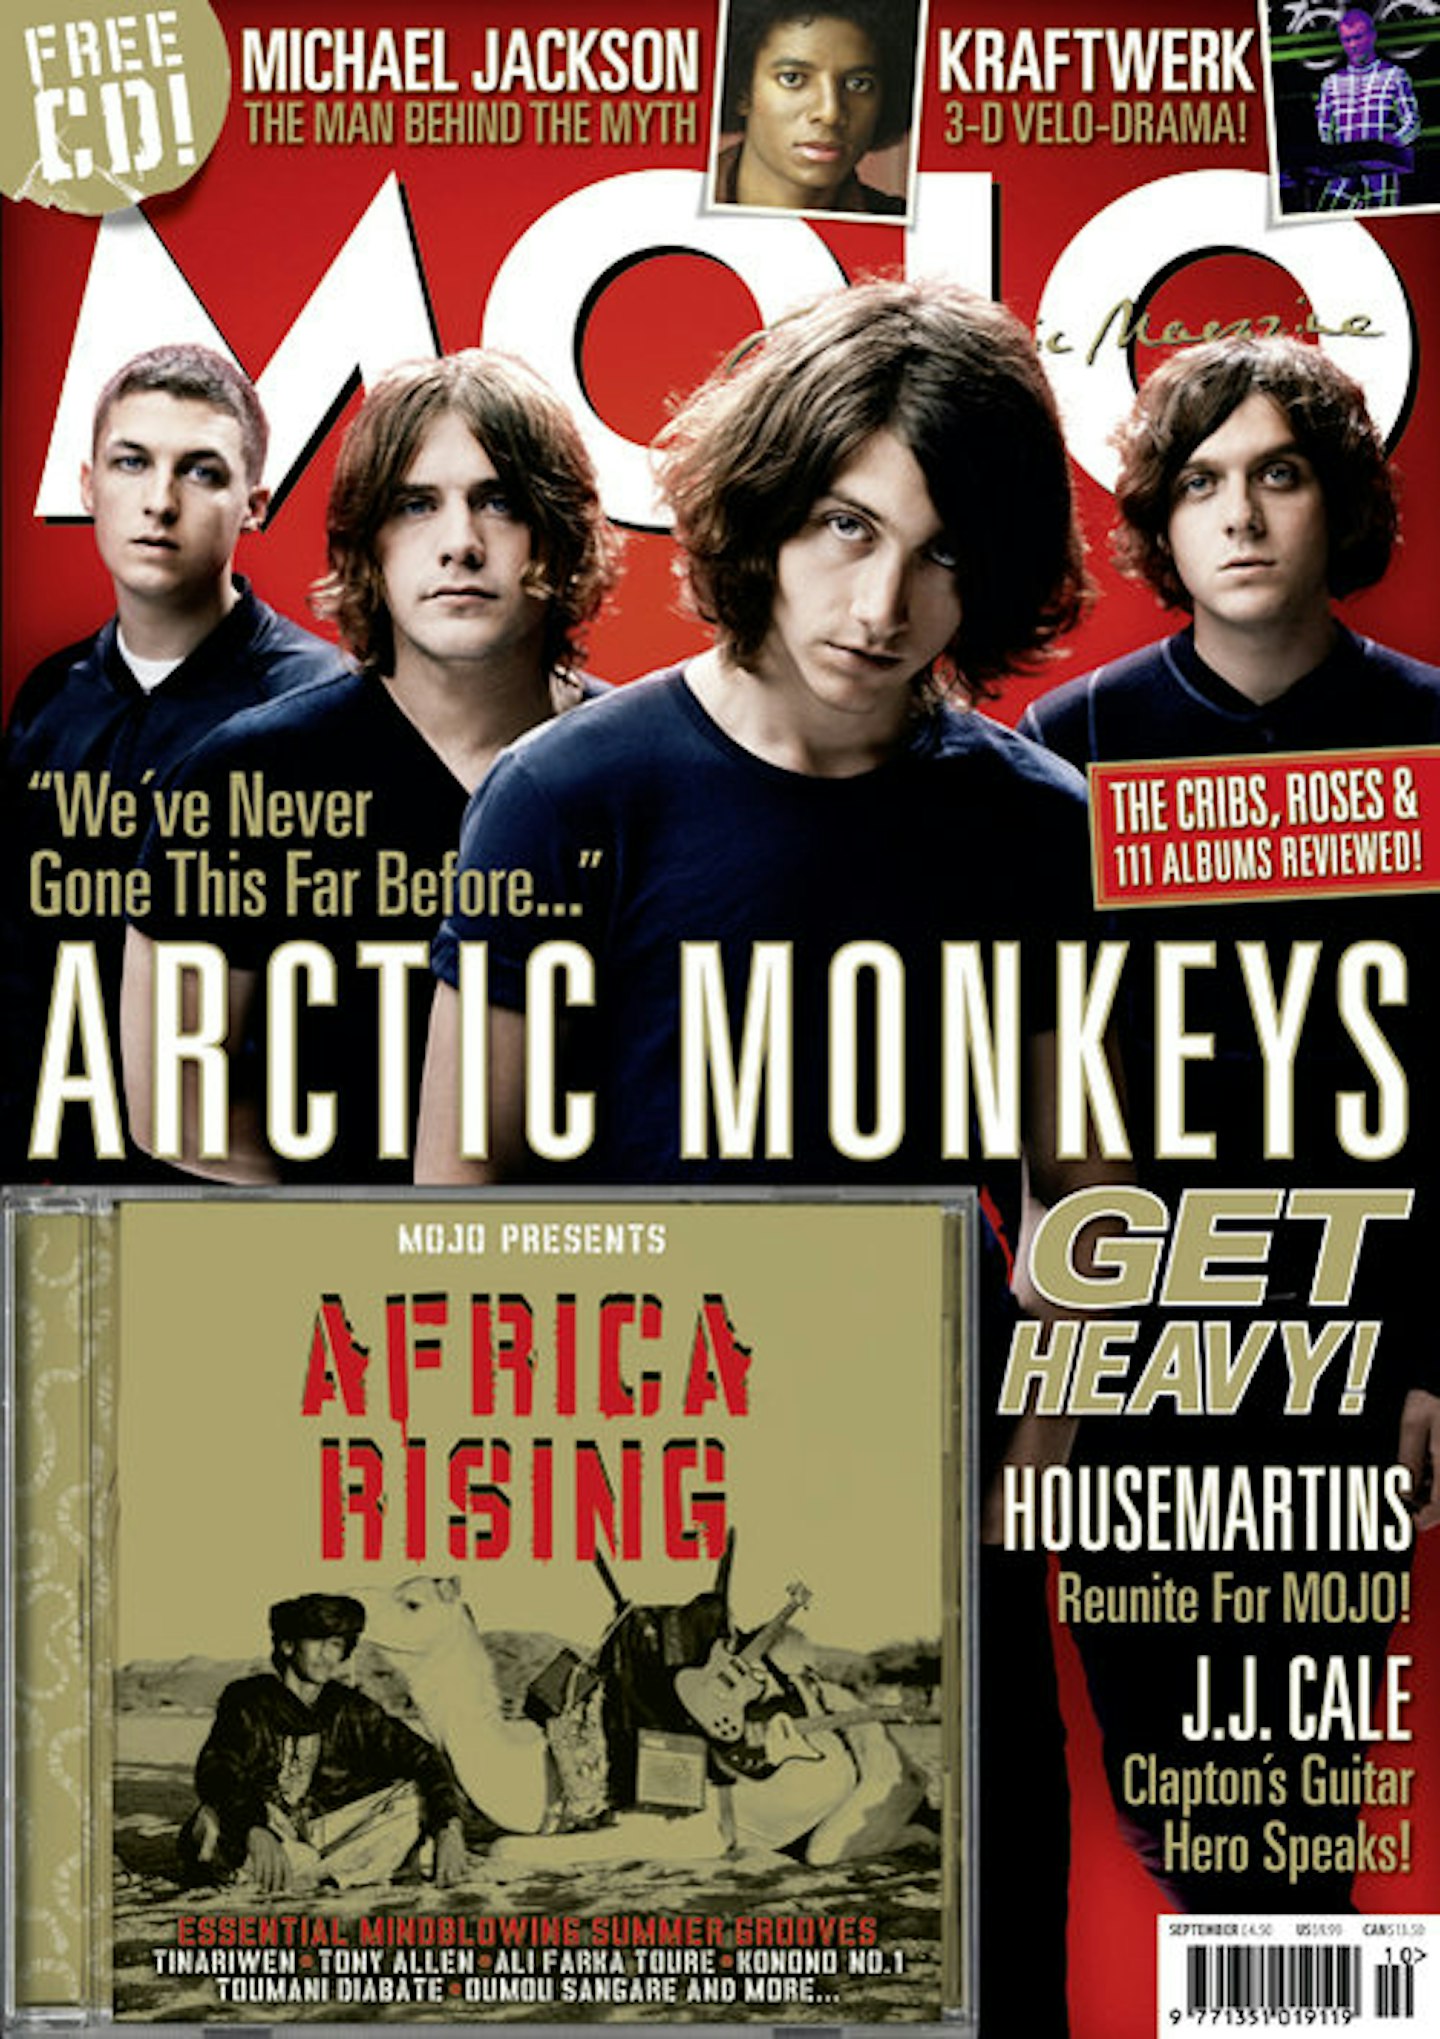 MOJO Issue 190 / August 2009